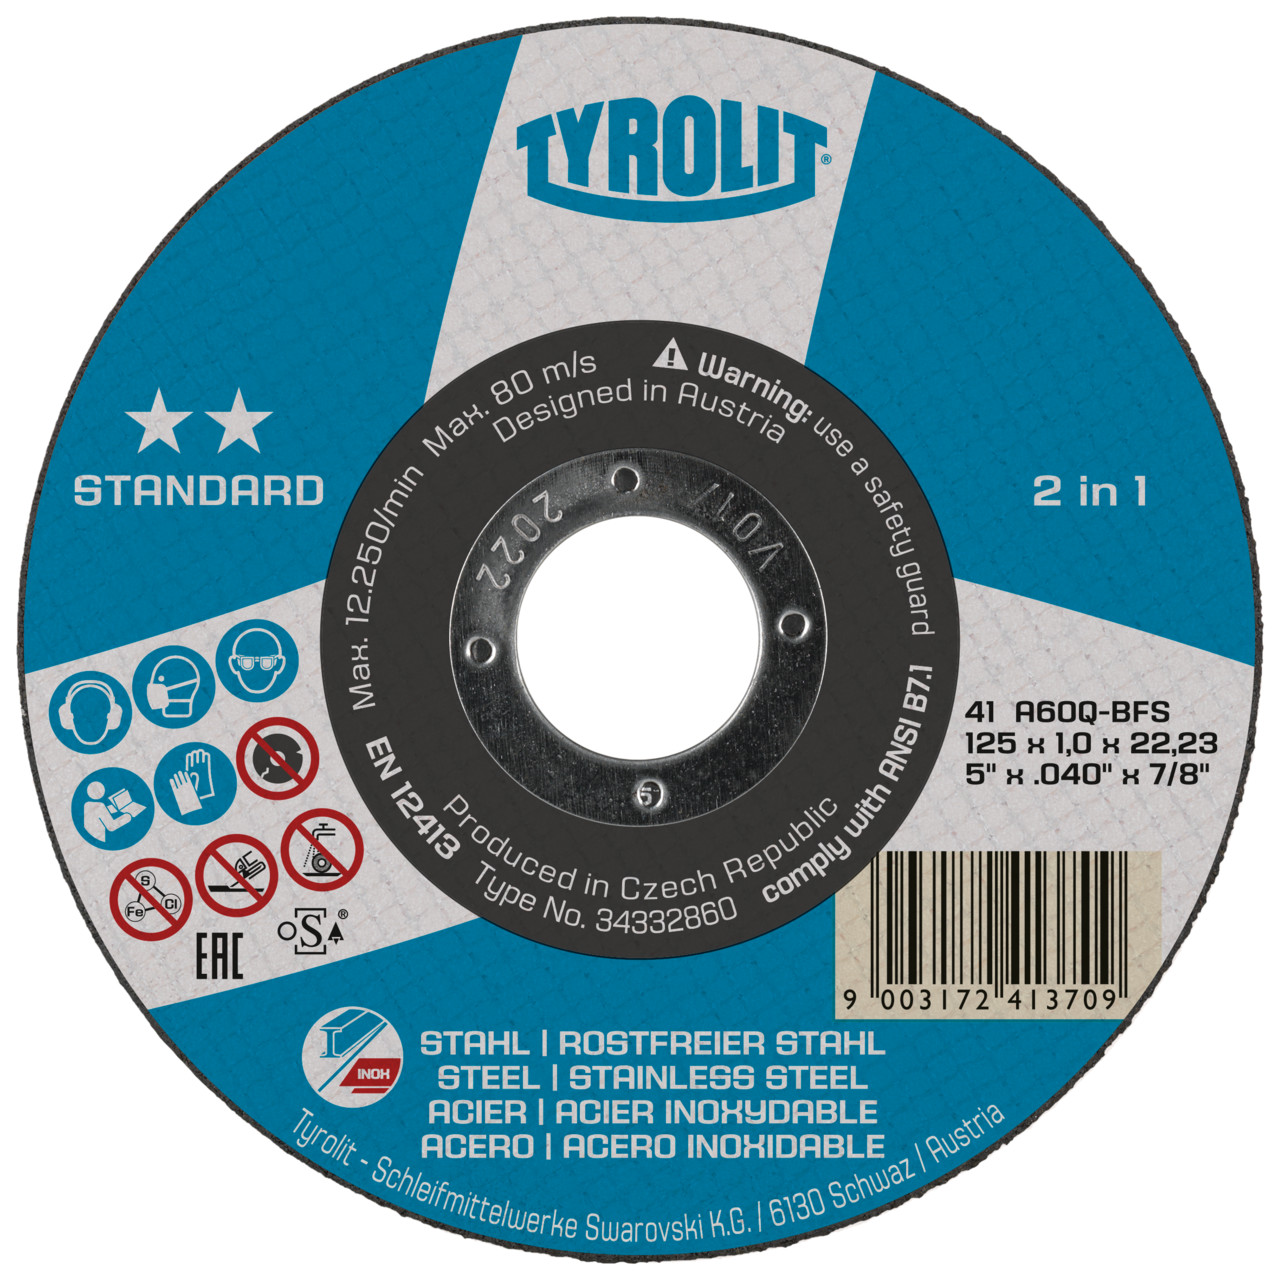 TYROLIT cut-off wheels DxDxH 230x1.9x22.23 2in1 for steel and stainless steel, shape: 41 - straight version, Art. 34332865